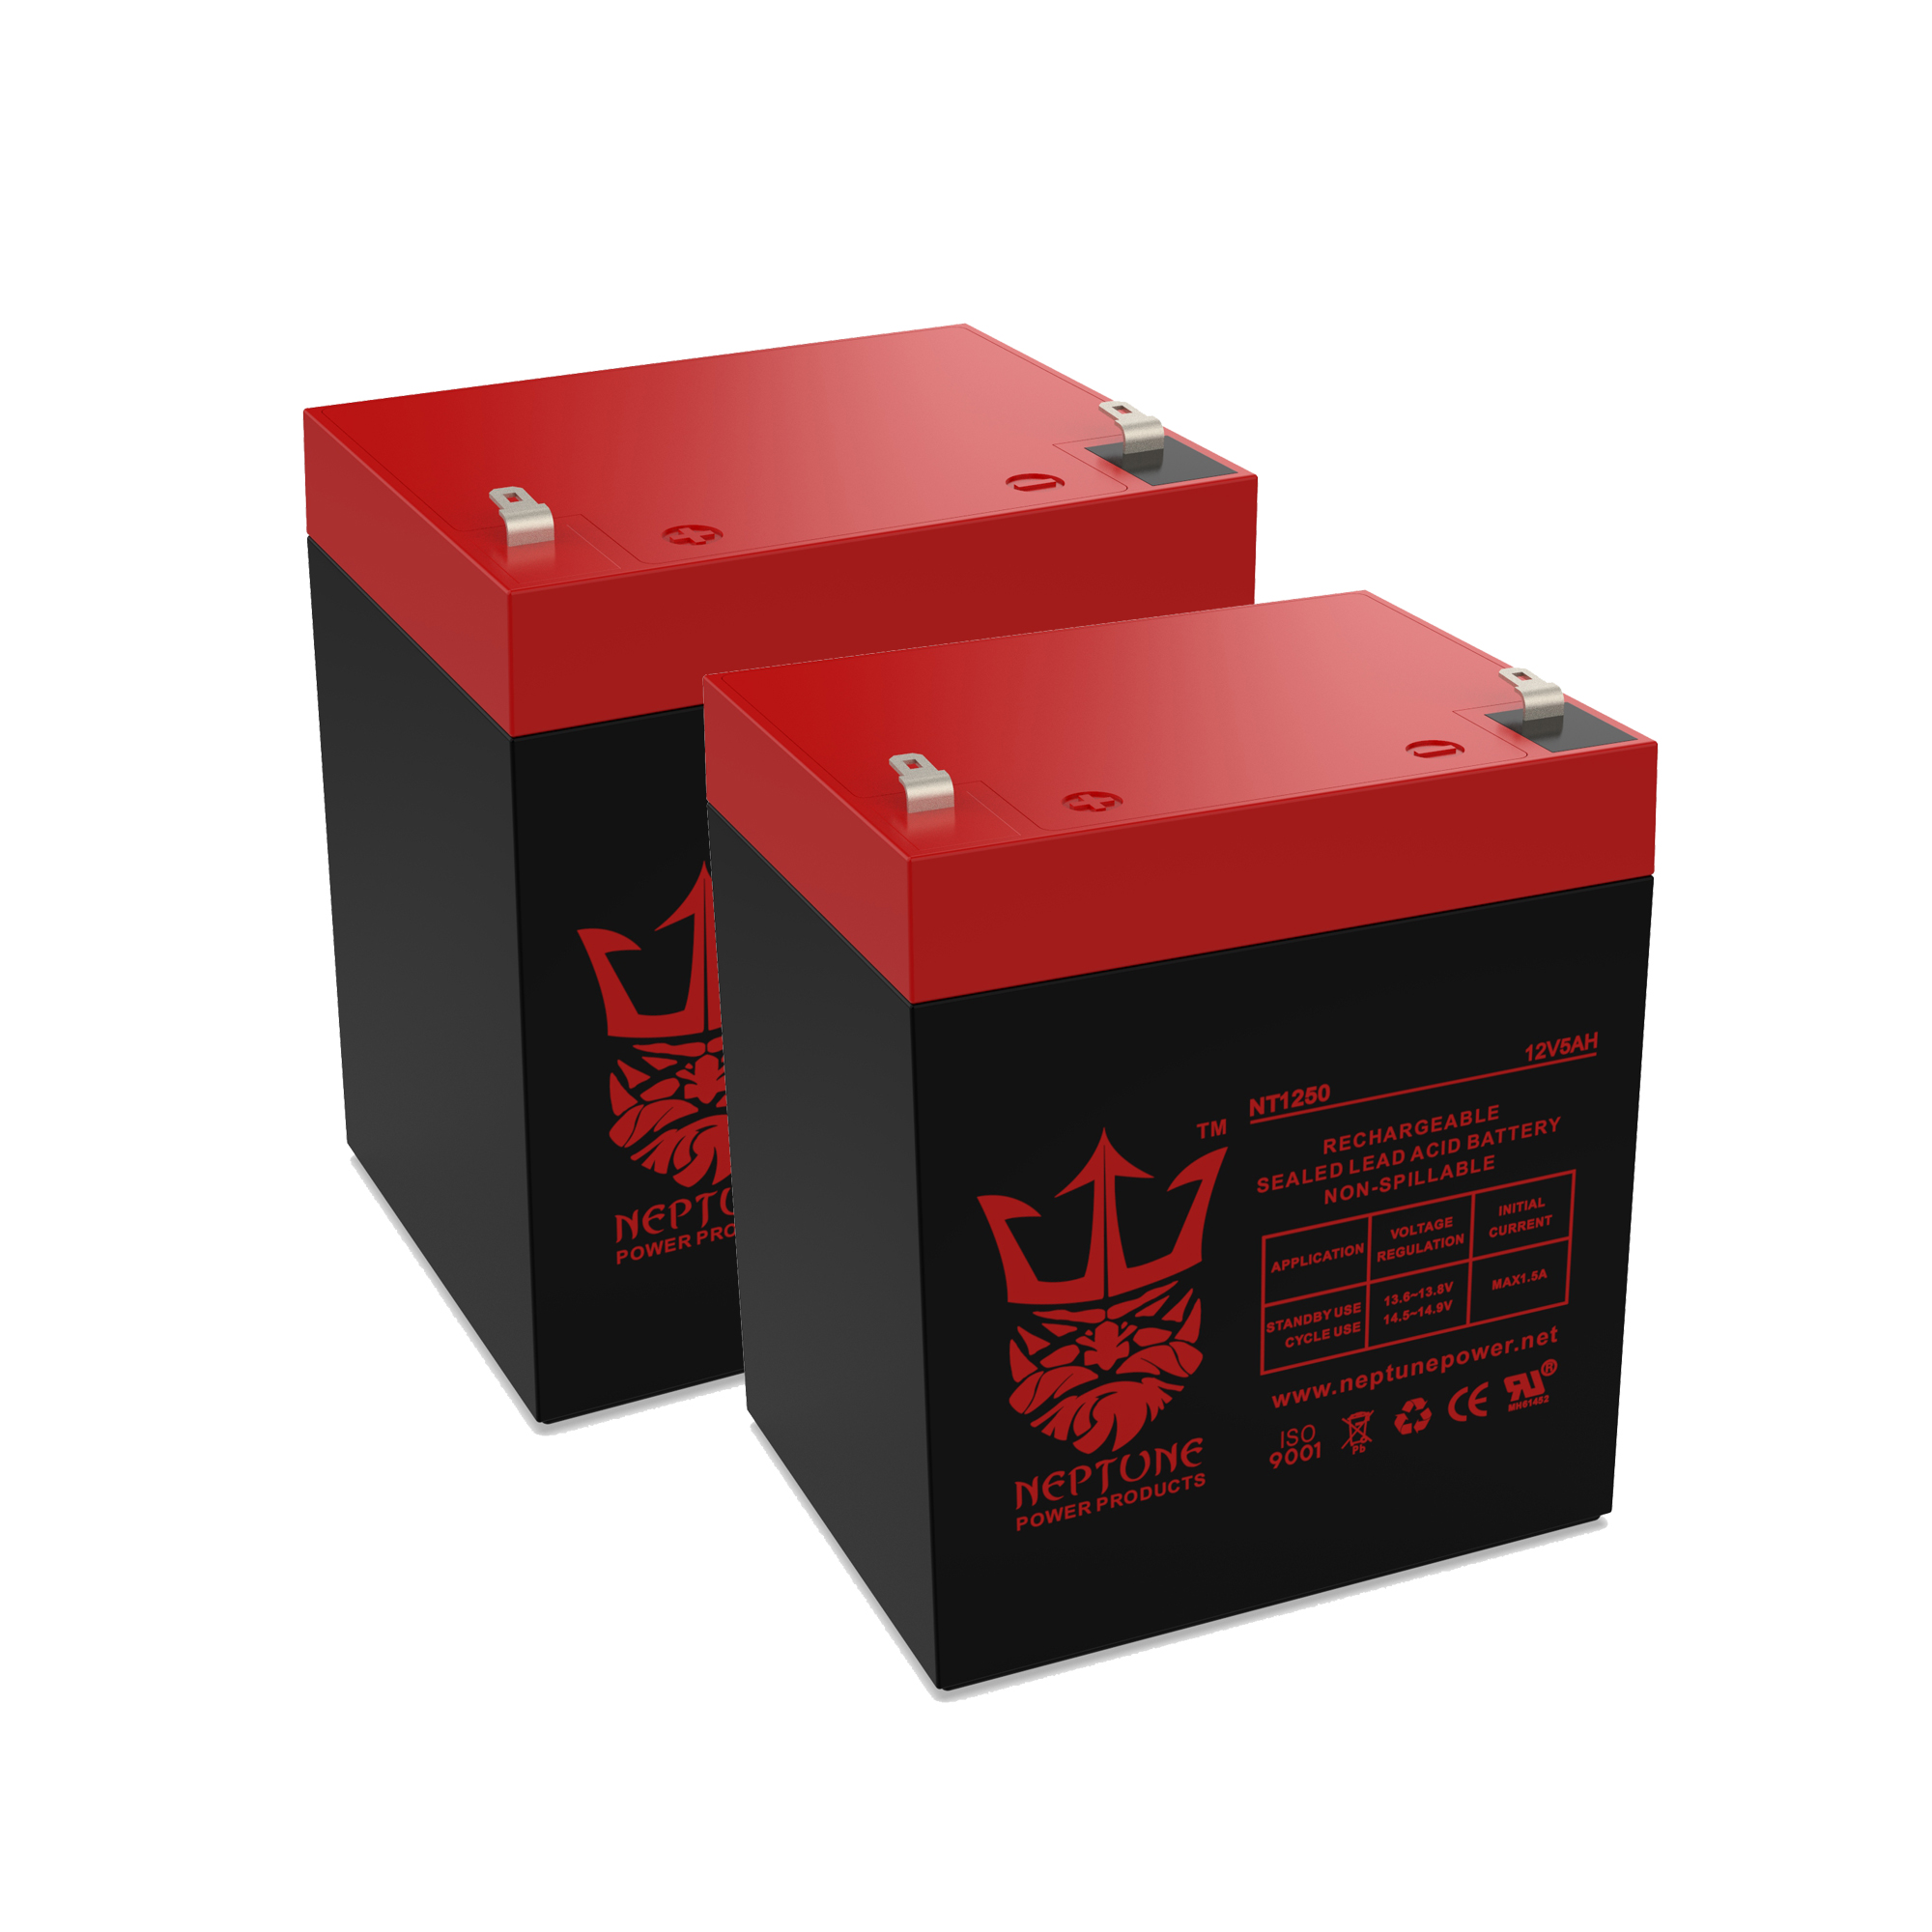 Ezip Scooter EZ3 Nano 12V 5Ah SLA Replacement Electric Scooter Battery by Neptune - 2 Pack - image 1 of 7